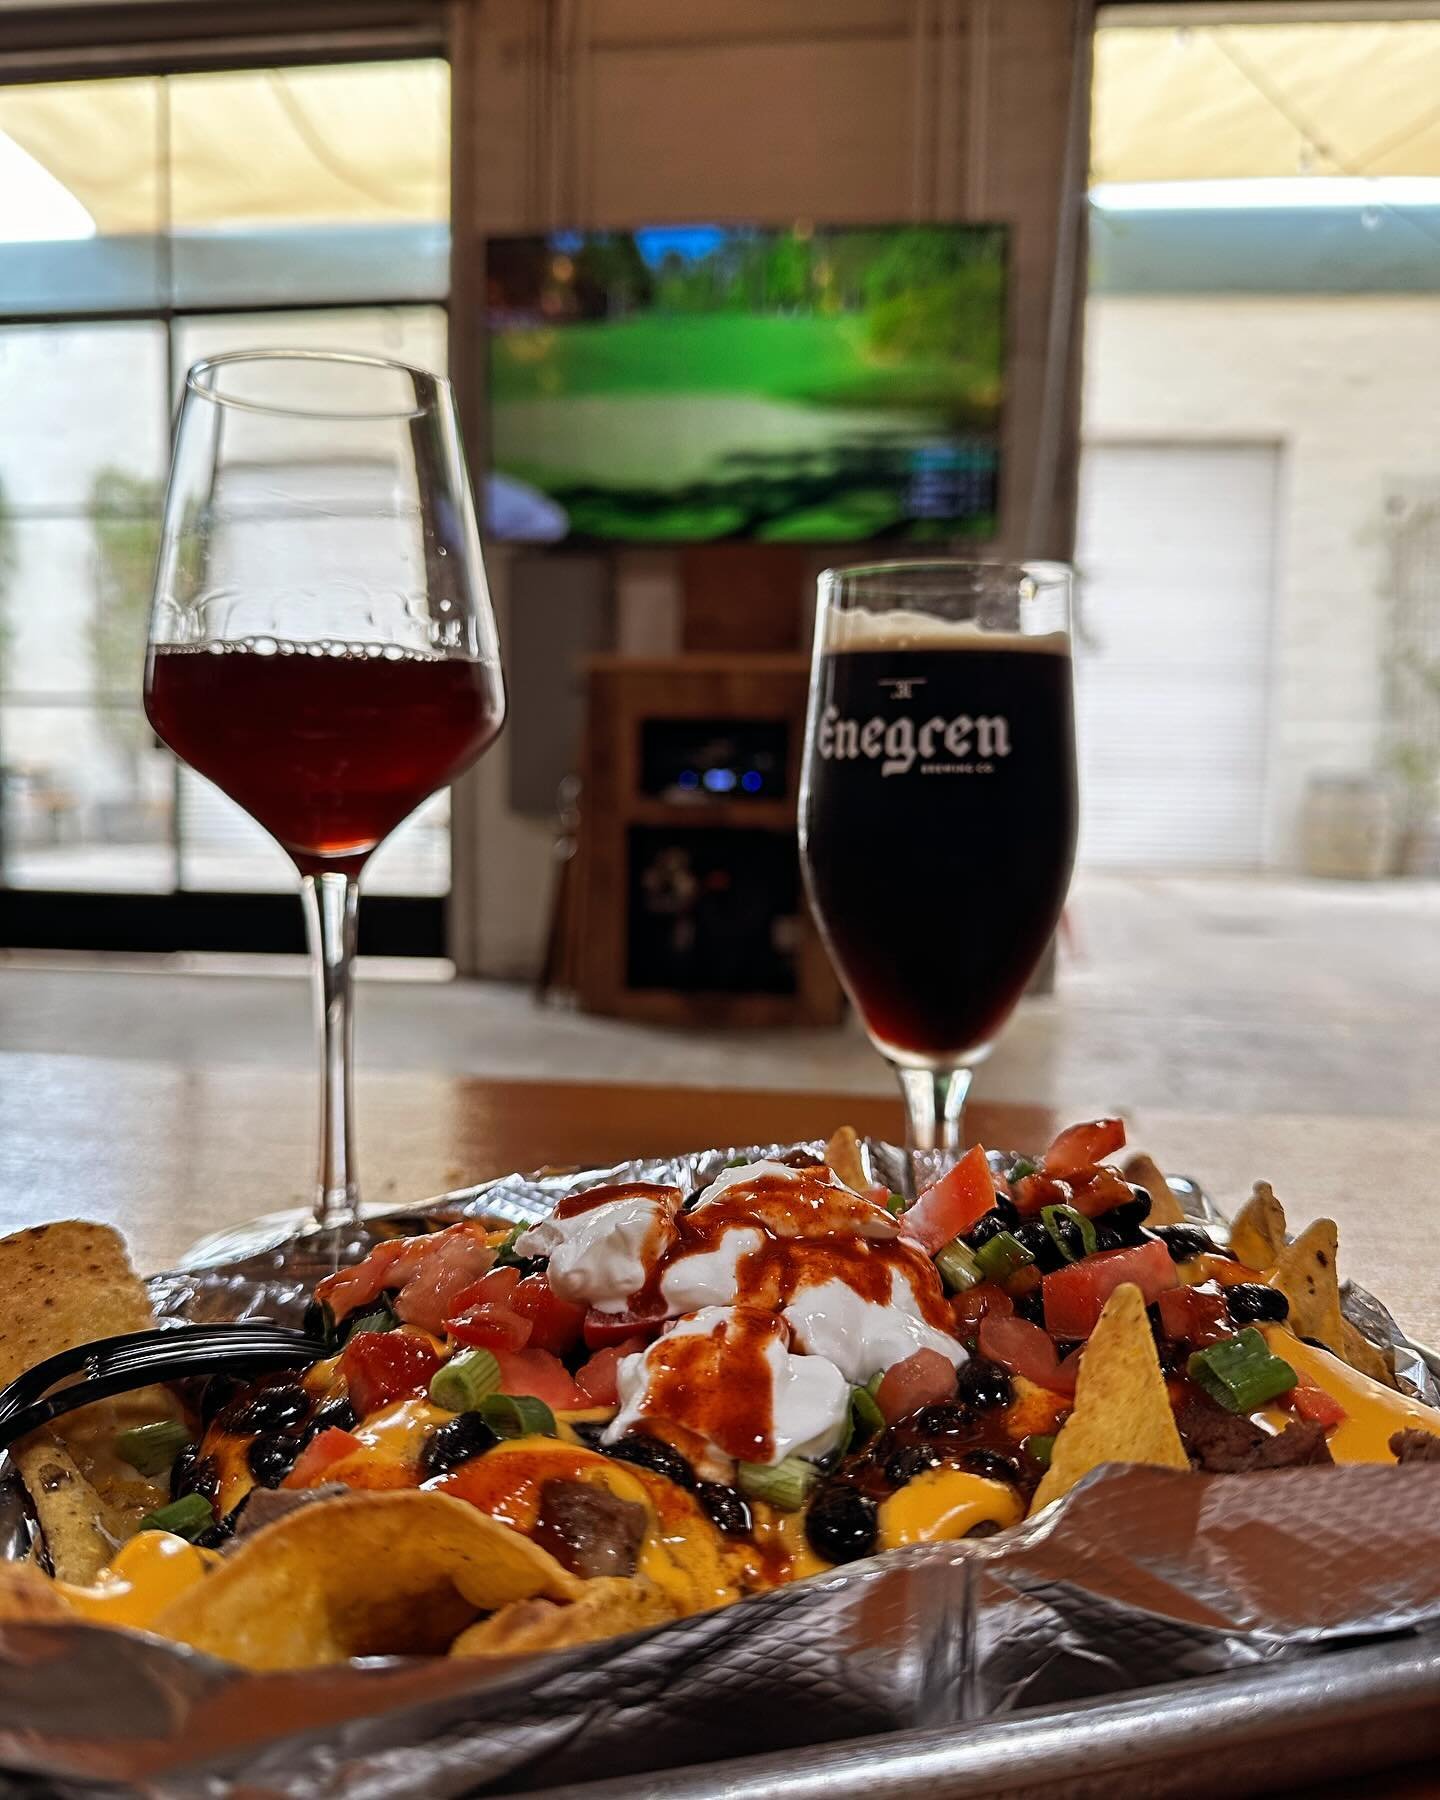 Come heat up with the best tri-tip nachos in town and nice glass of red @lucas_sellers_wine or Baltic Maple @enegrenbrewing and enjoy the Masters tournament in Cellar 2!  @theoutpostmoorpark @cacoffeerepublic @thecrafthouse805